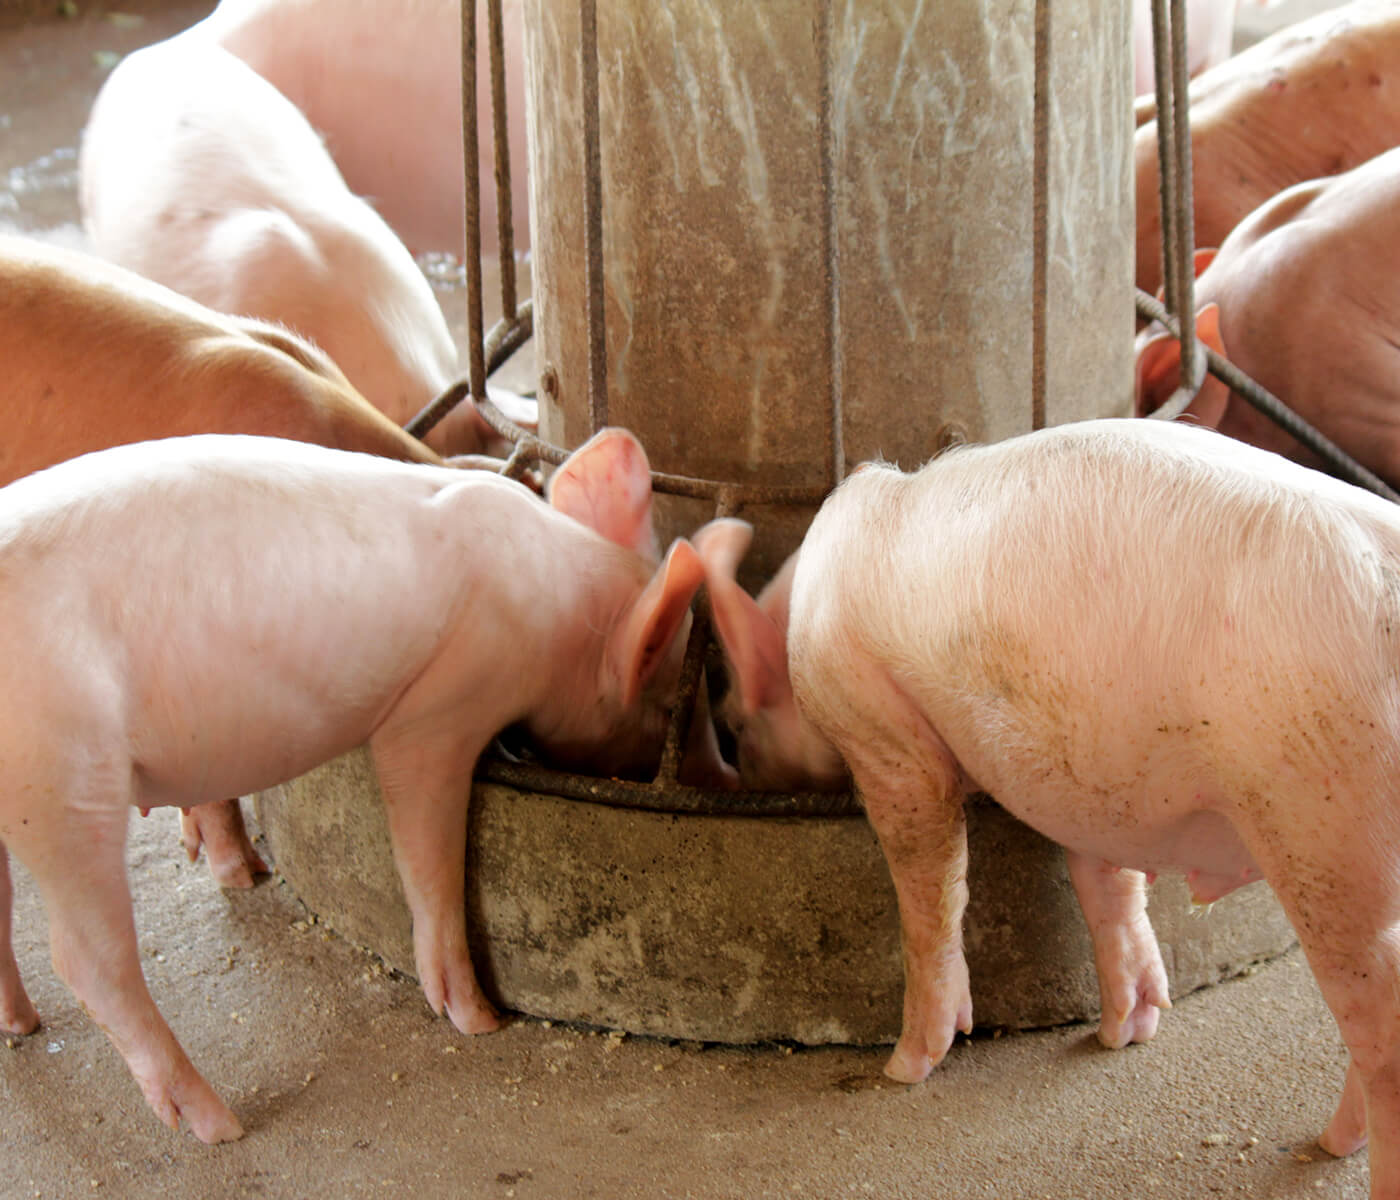 Effects of fiber and lignocellulose inclusion in piglet diets